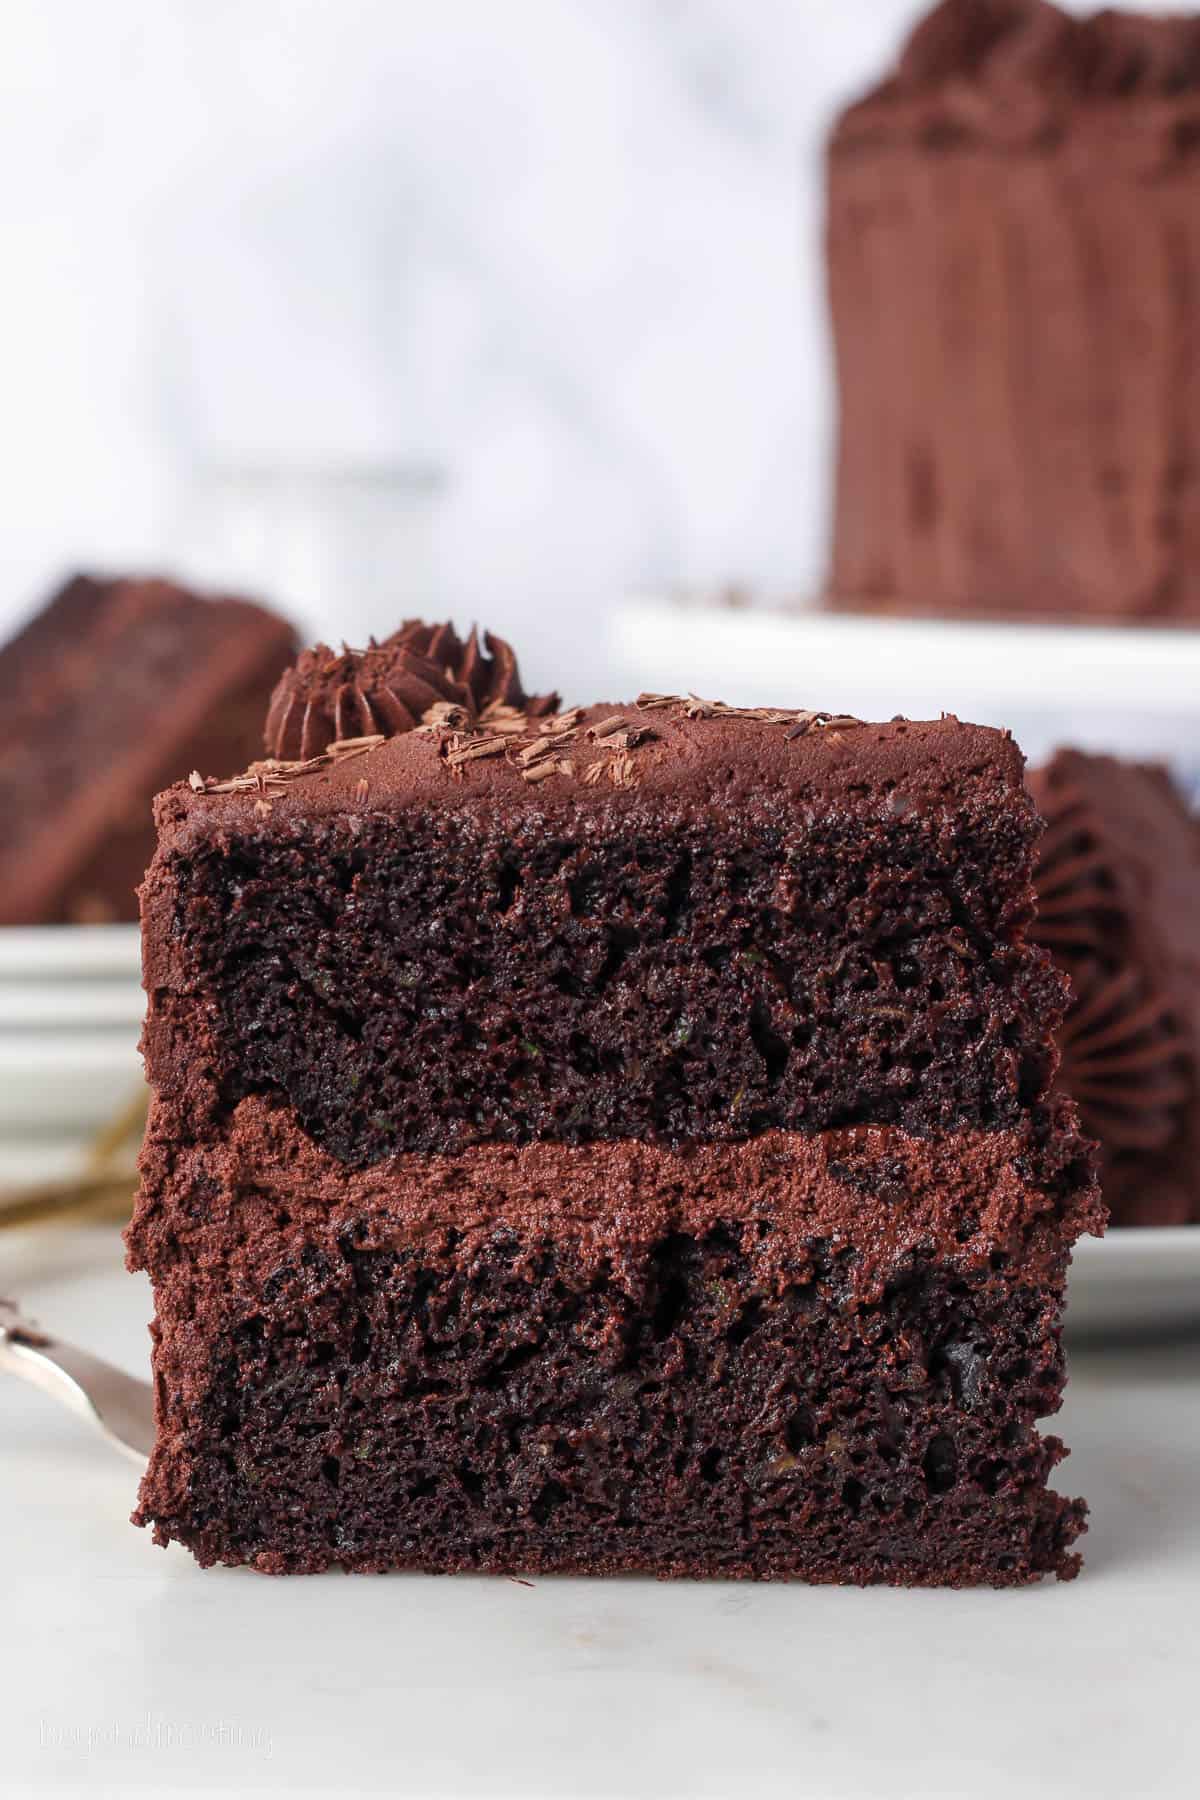 A slice of frosted chocolate zucchini cake standing upright on a plate.